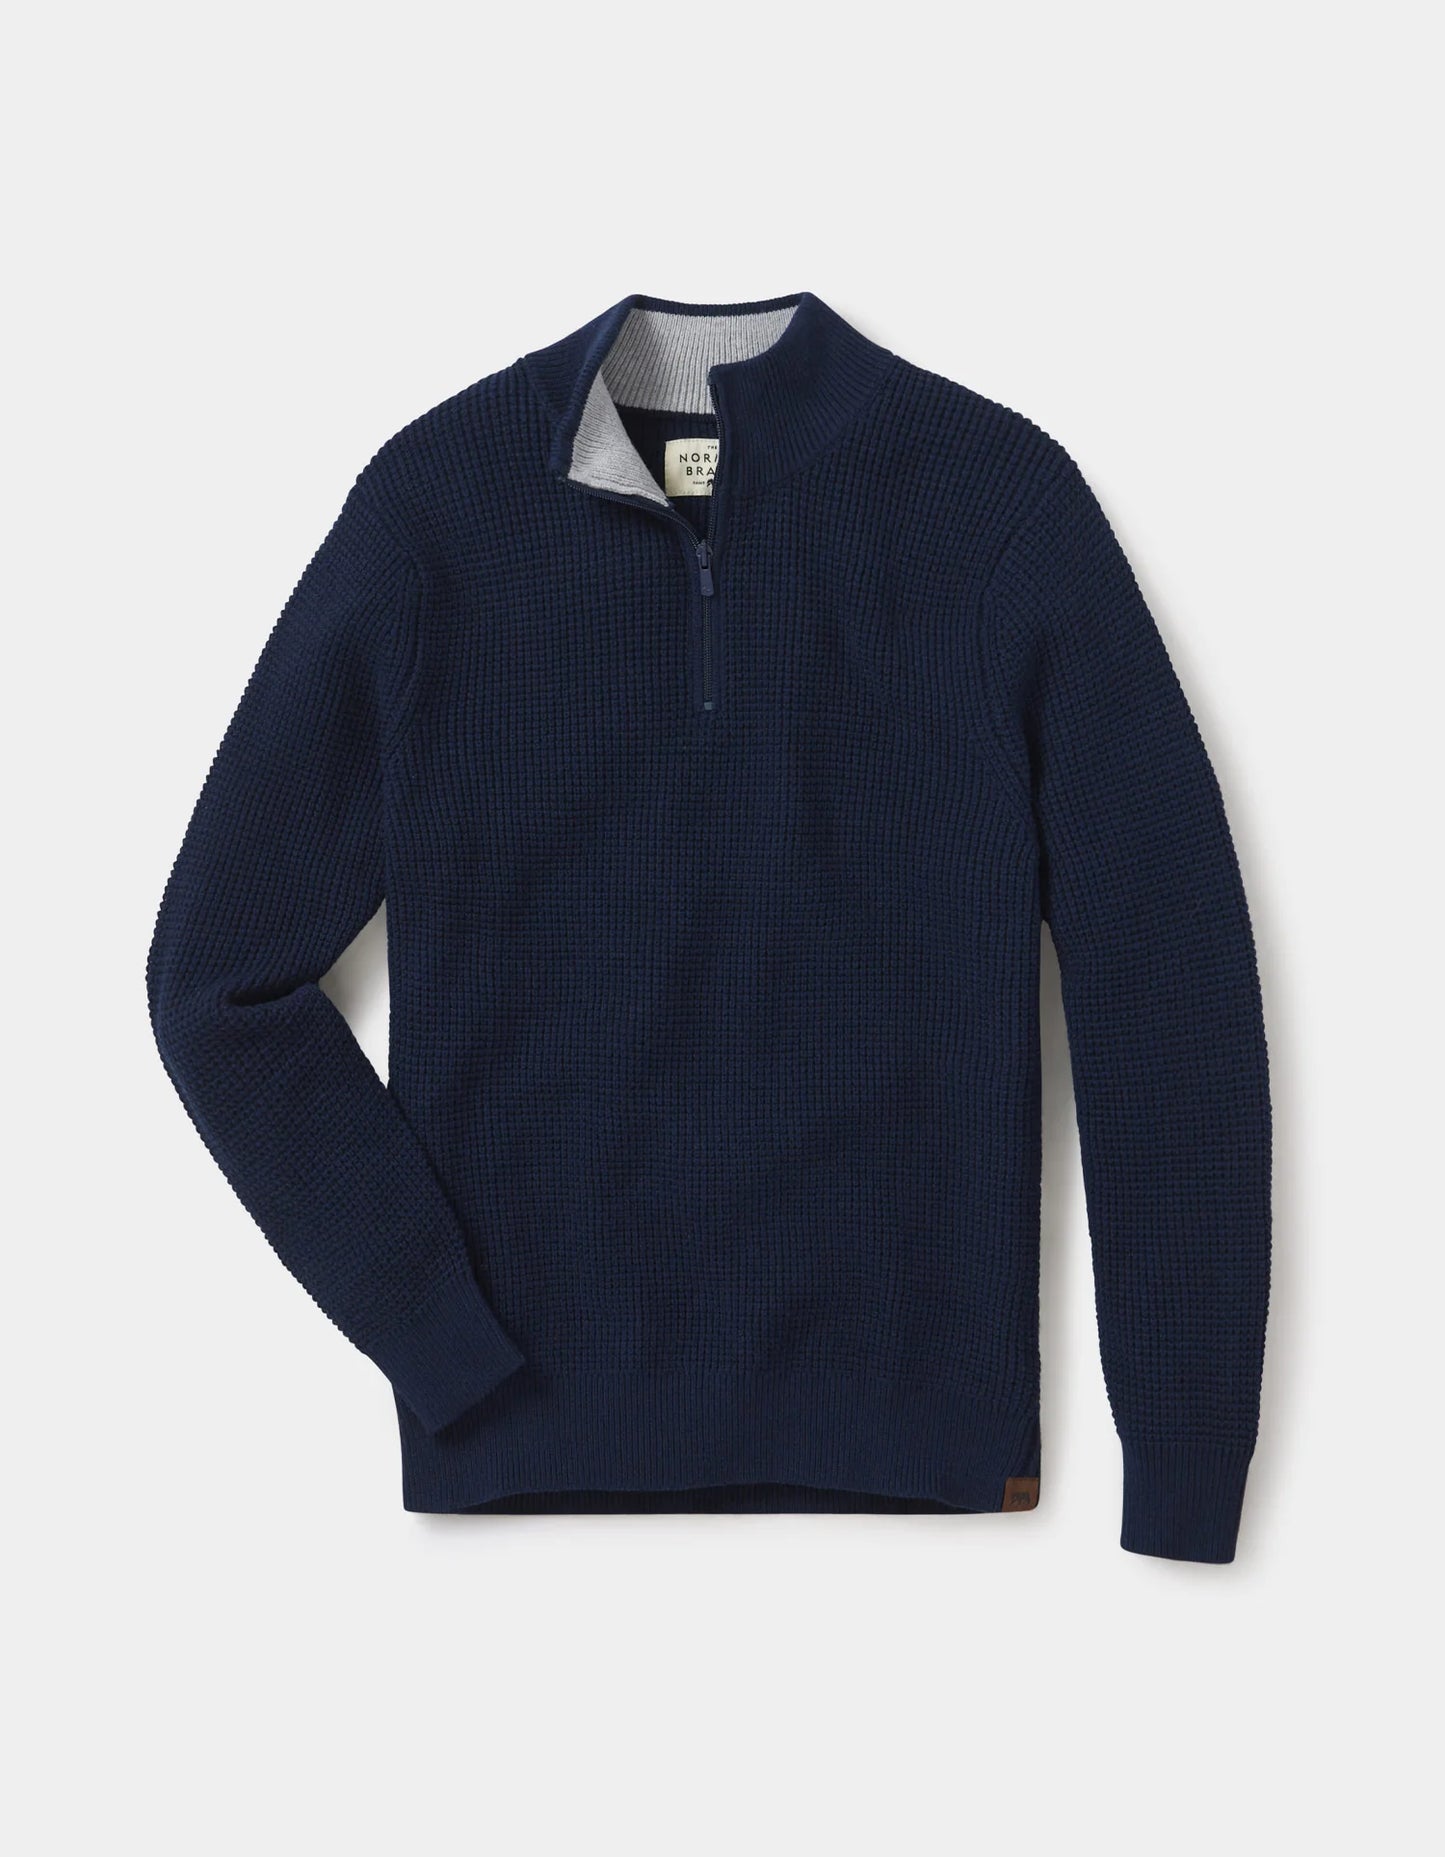 The Normal Brand Waffle Knit Quarter Zip